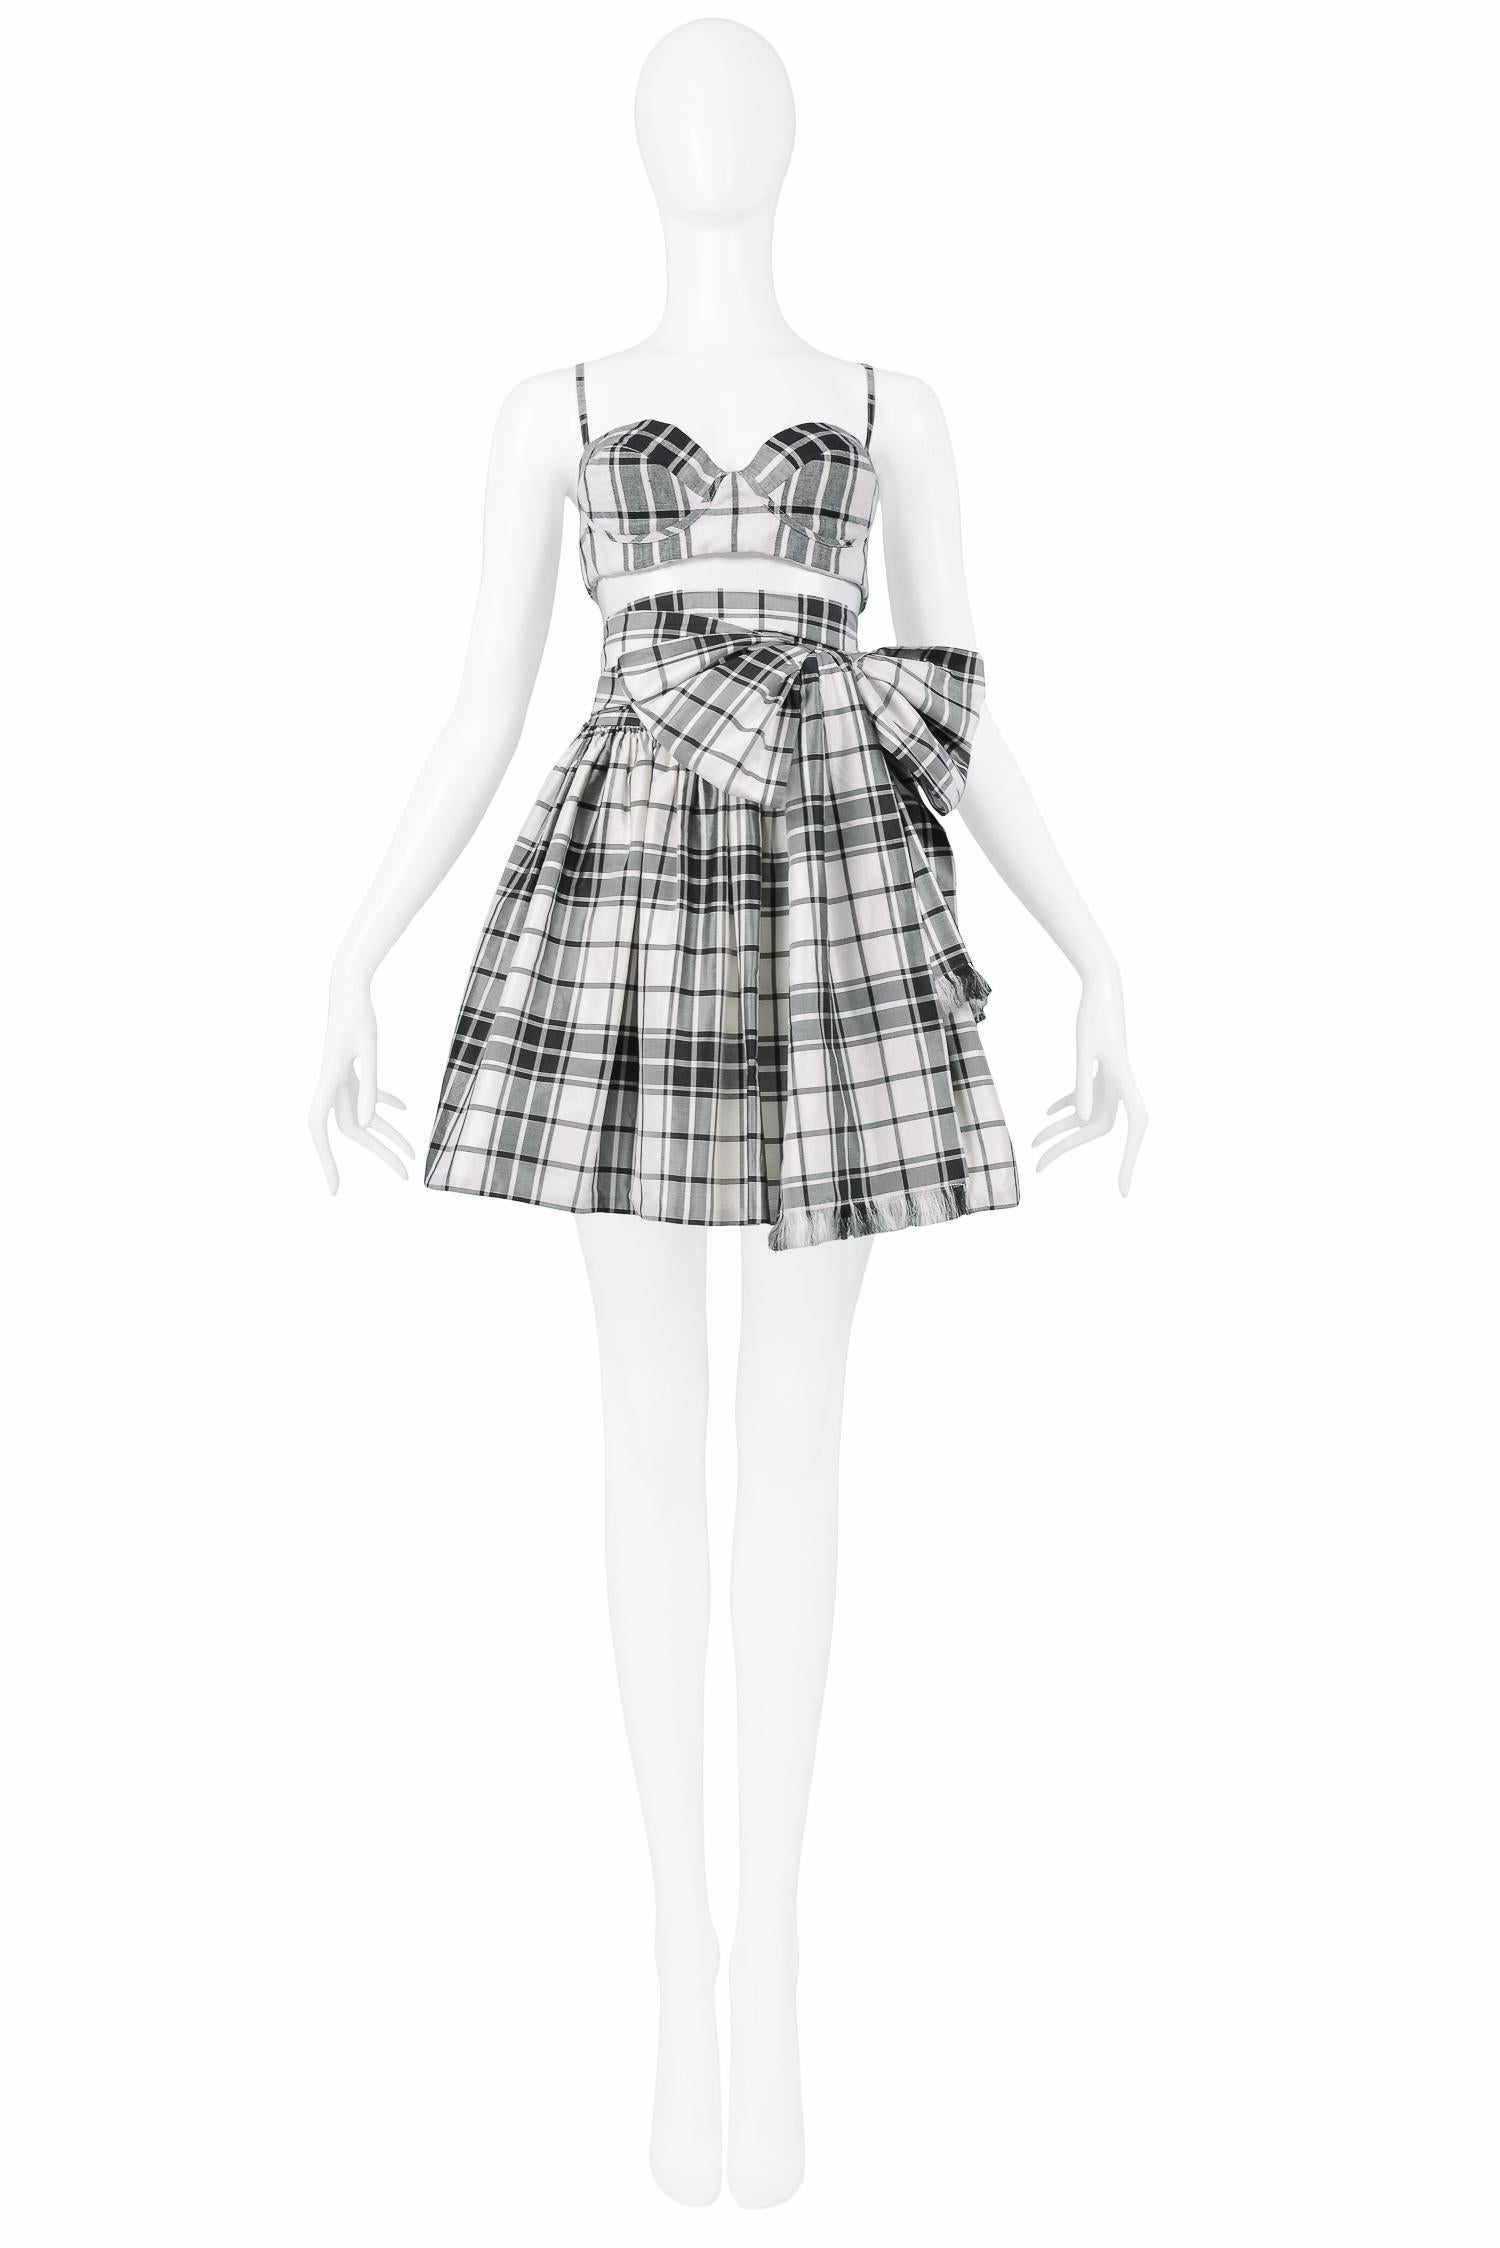 Vintage Michael Kors black & white plaid ensemble with bustier crop top and matching full mini skirt with attached wrap tie that ties in the front or back. 1992 Spring/Summer Collection.

Excellent Vintage Condition.

Size
Top: Small
Skirt: Medium